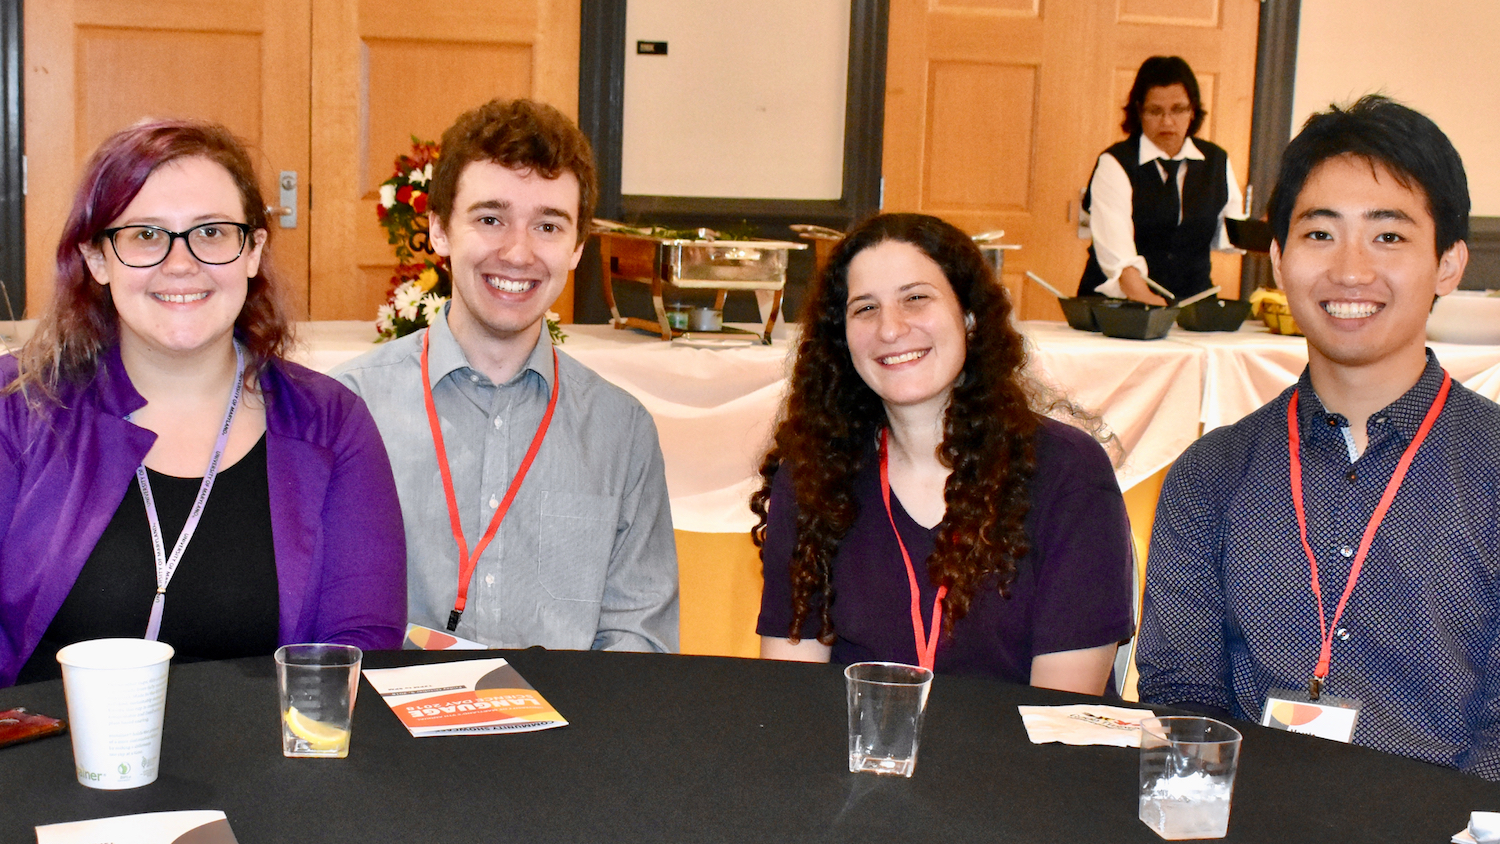 Three PhD students in Linguistics, with a faculty mentor, sitting at a conference, all wearing lanyards for a meeting, smiling at the camera